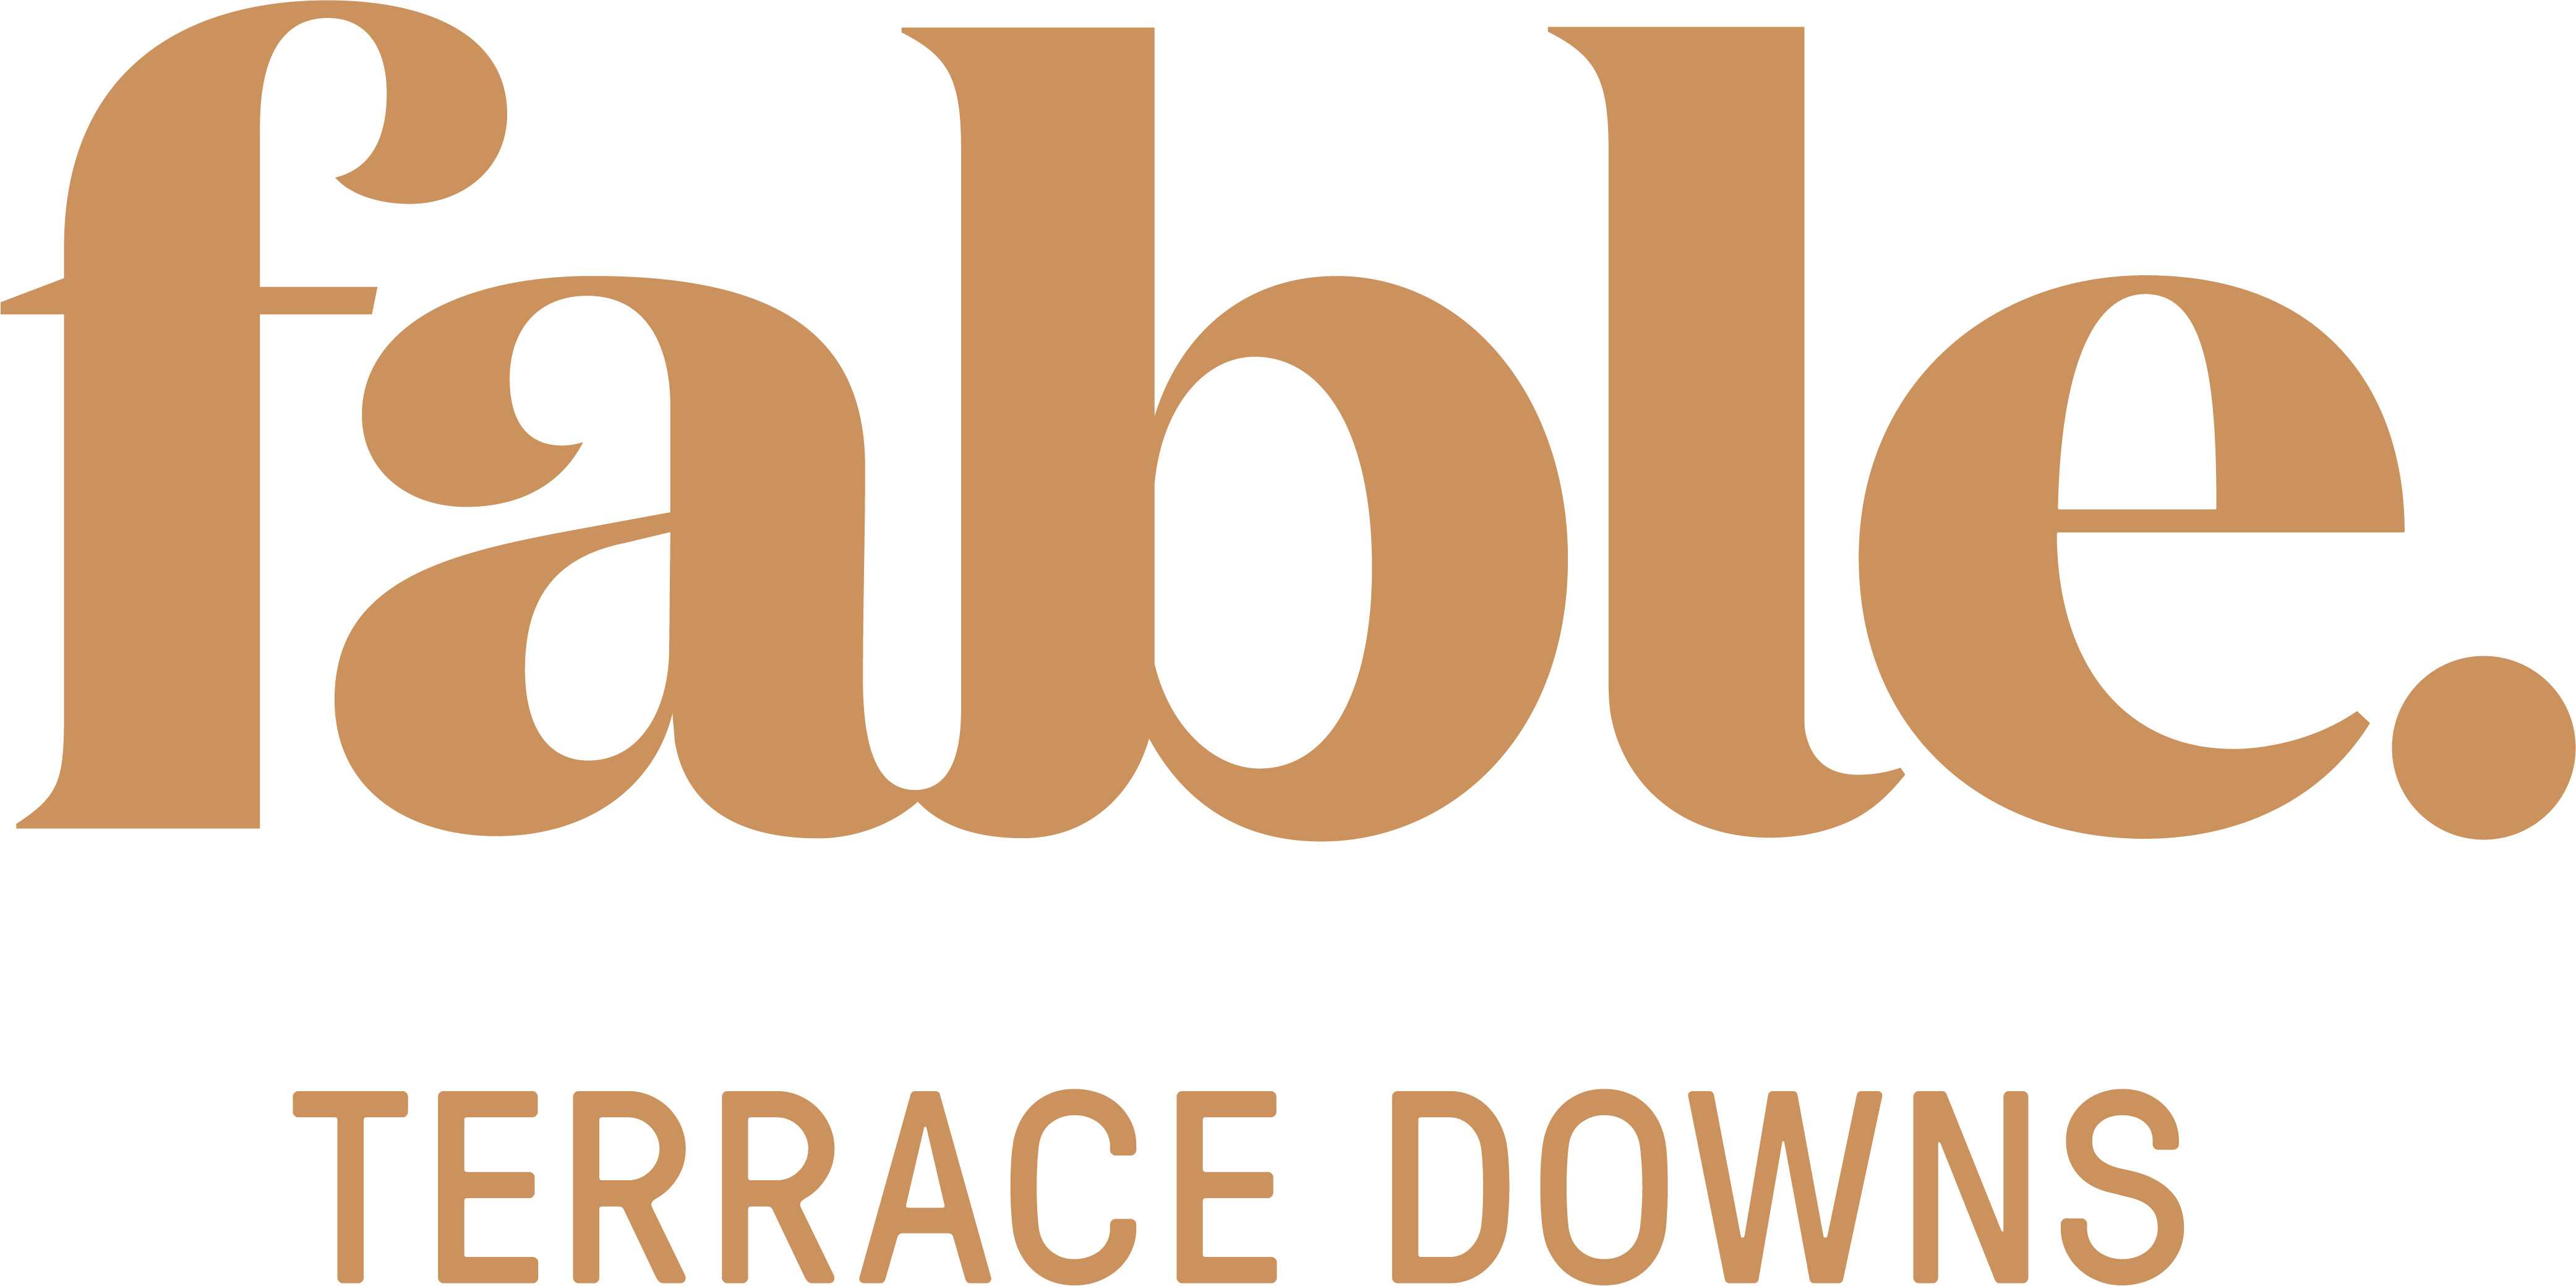 
Fable Terrace Downs